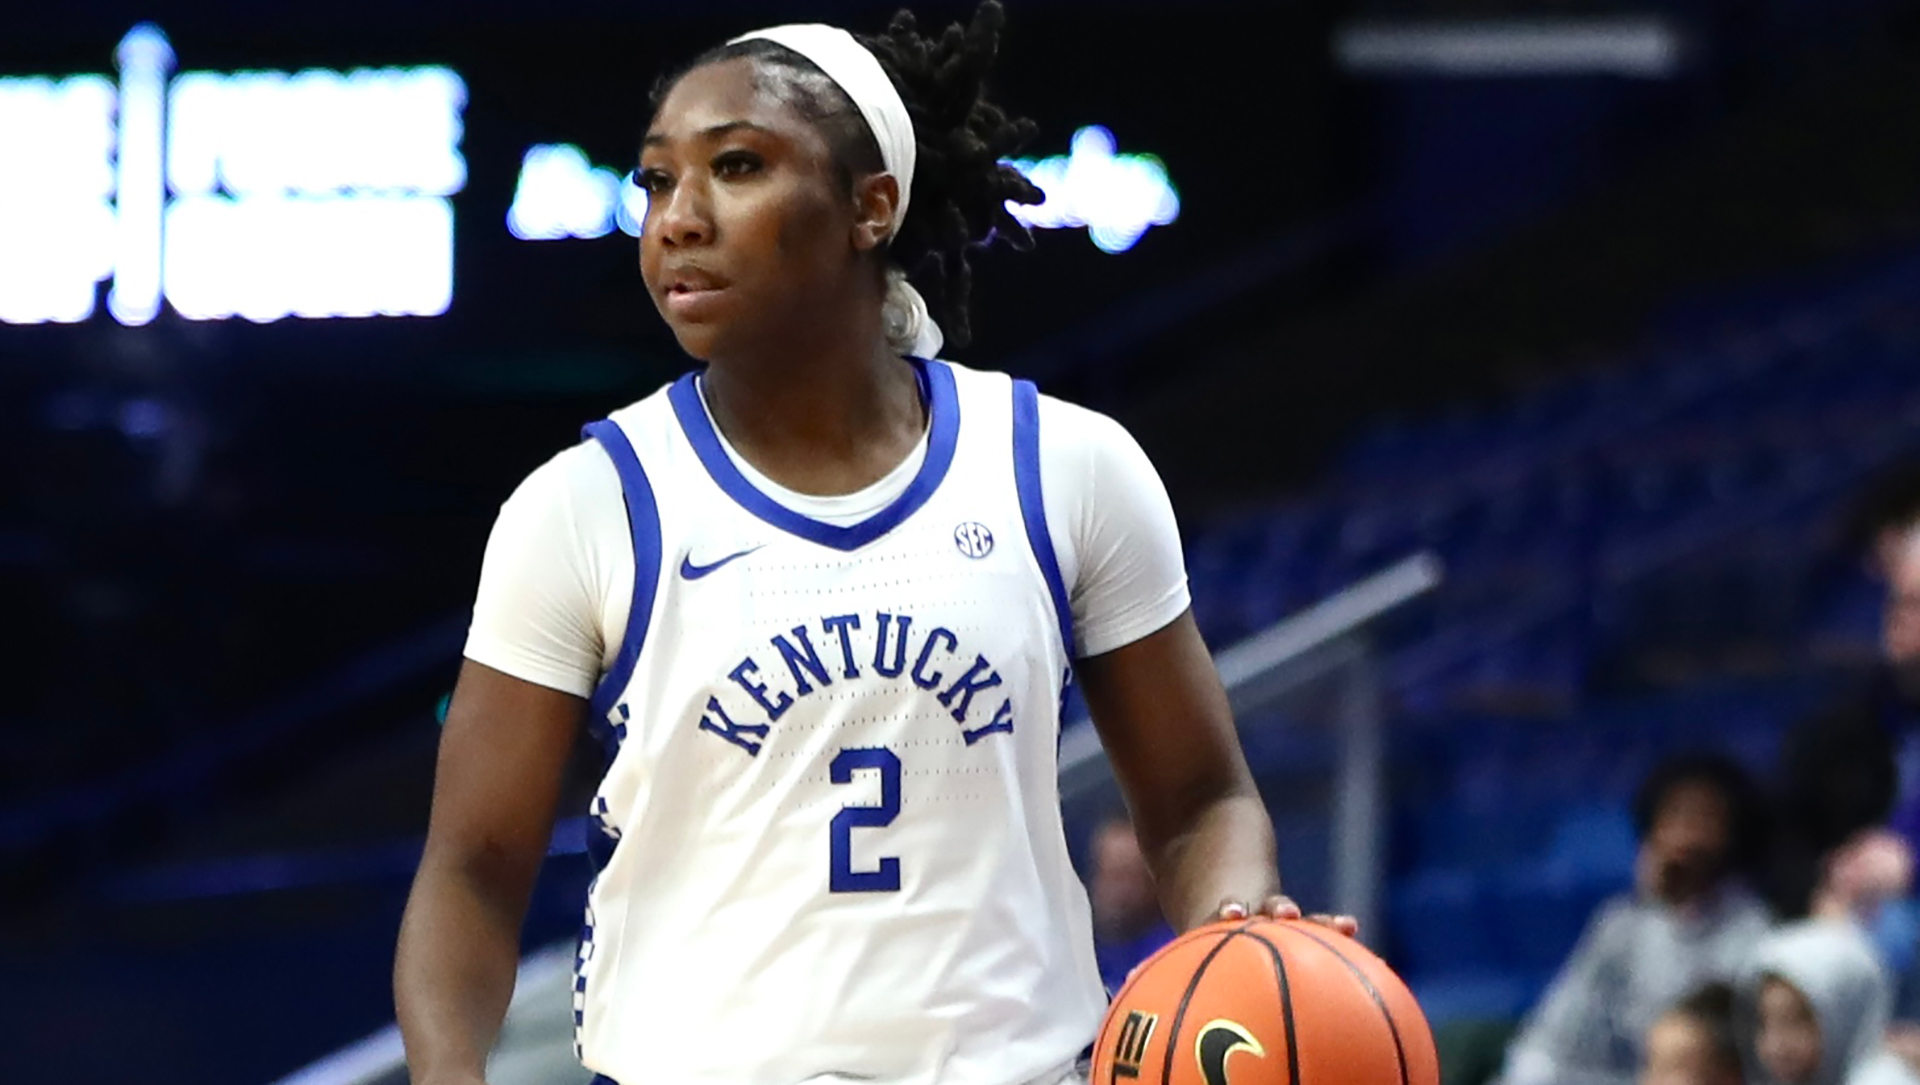 Kentucky-Ole Miss Women's Basketball Postgame Quotes